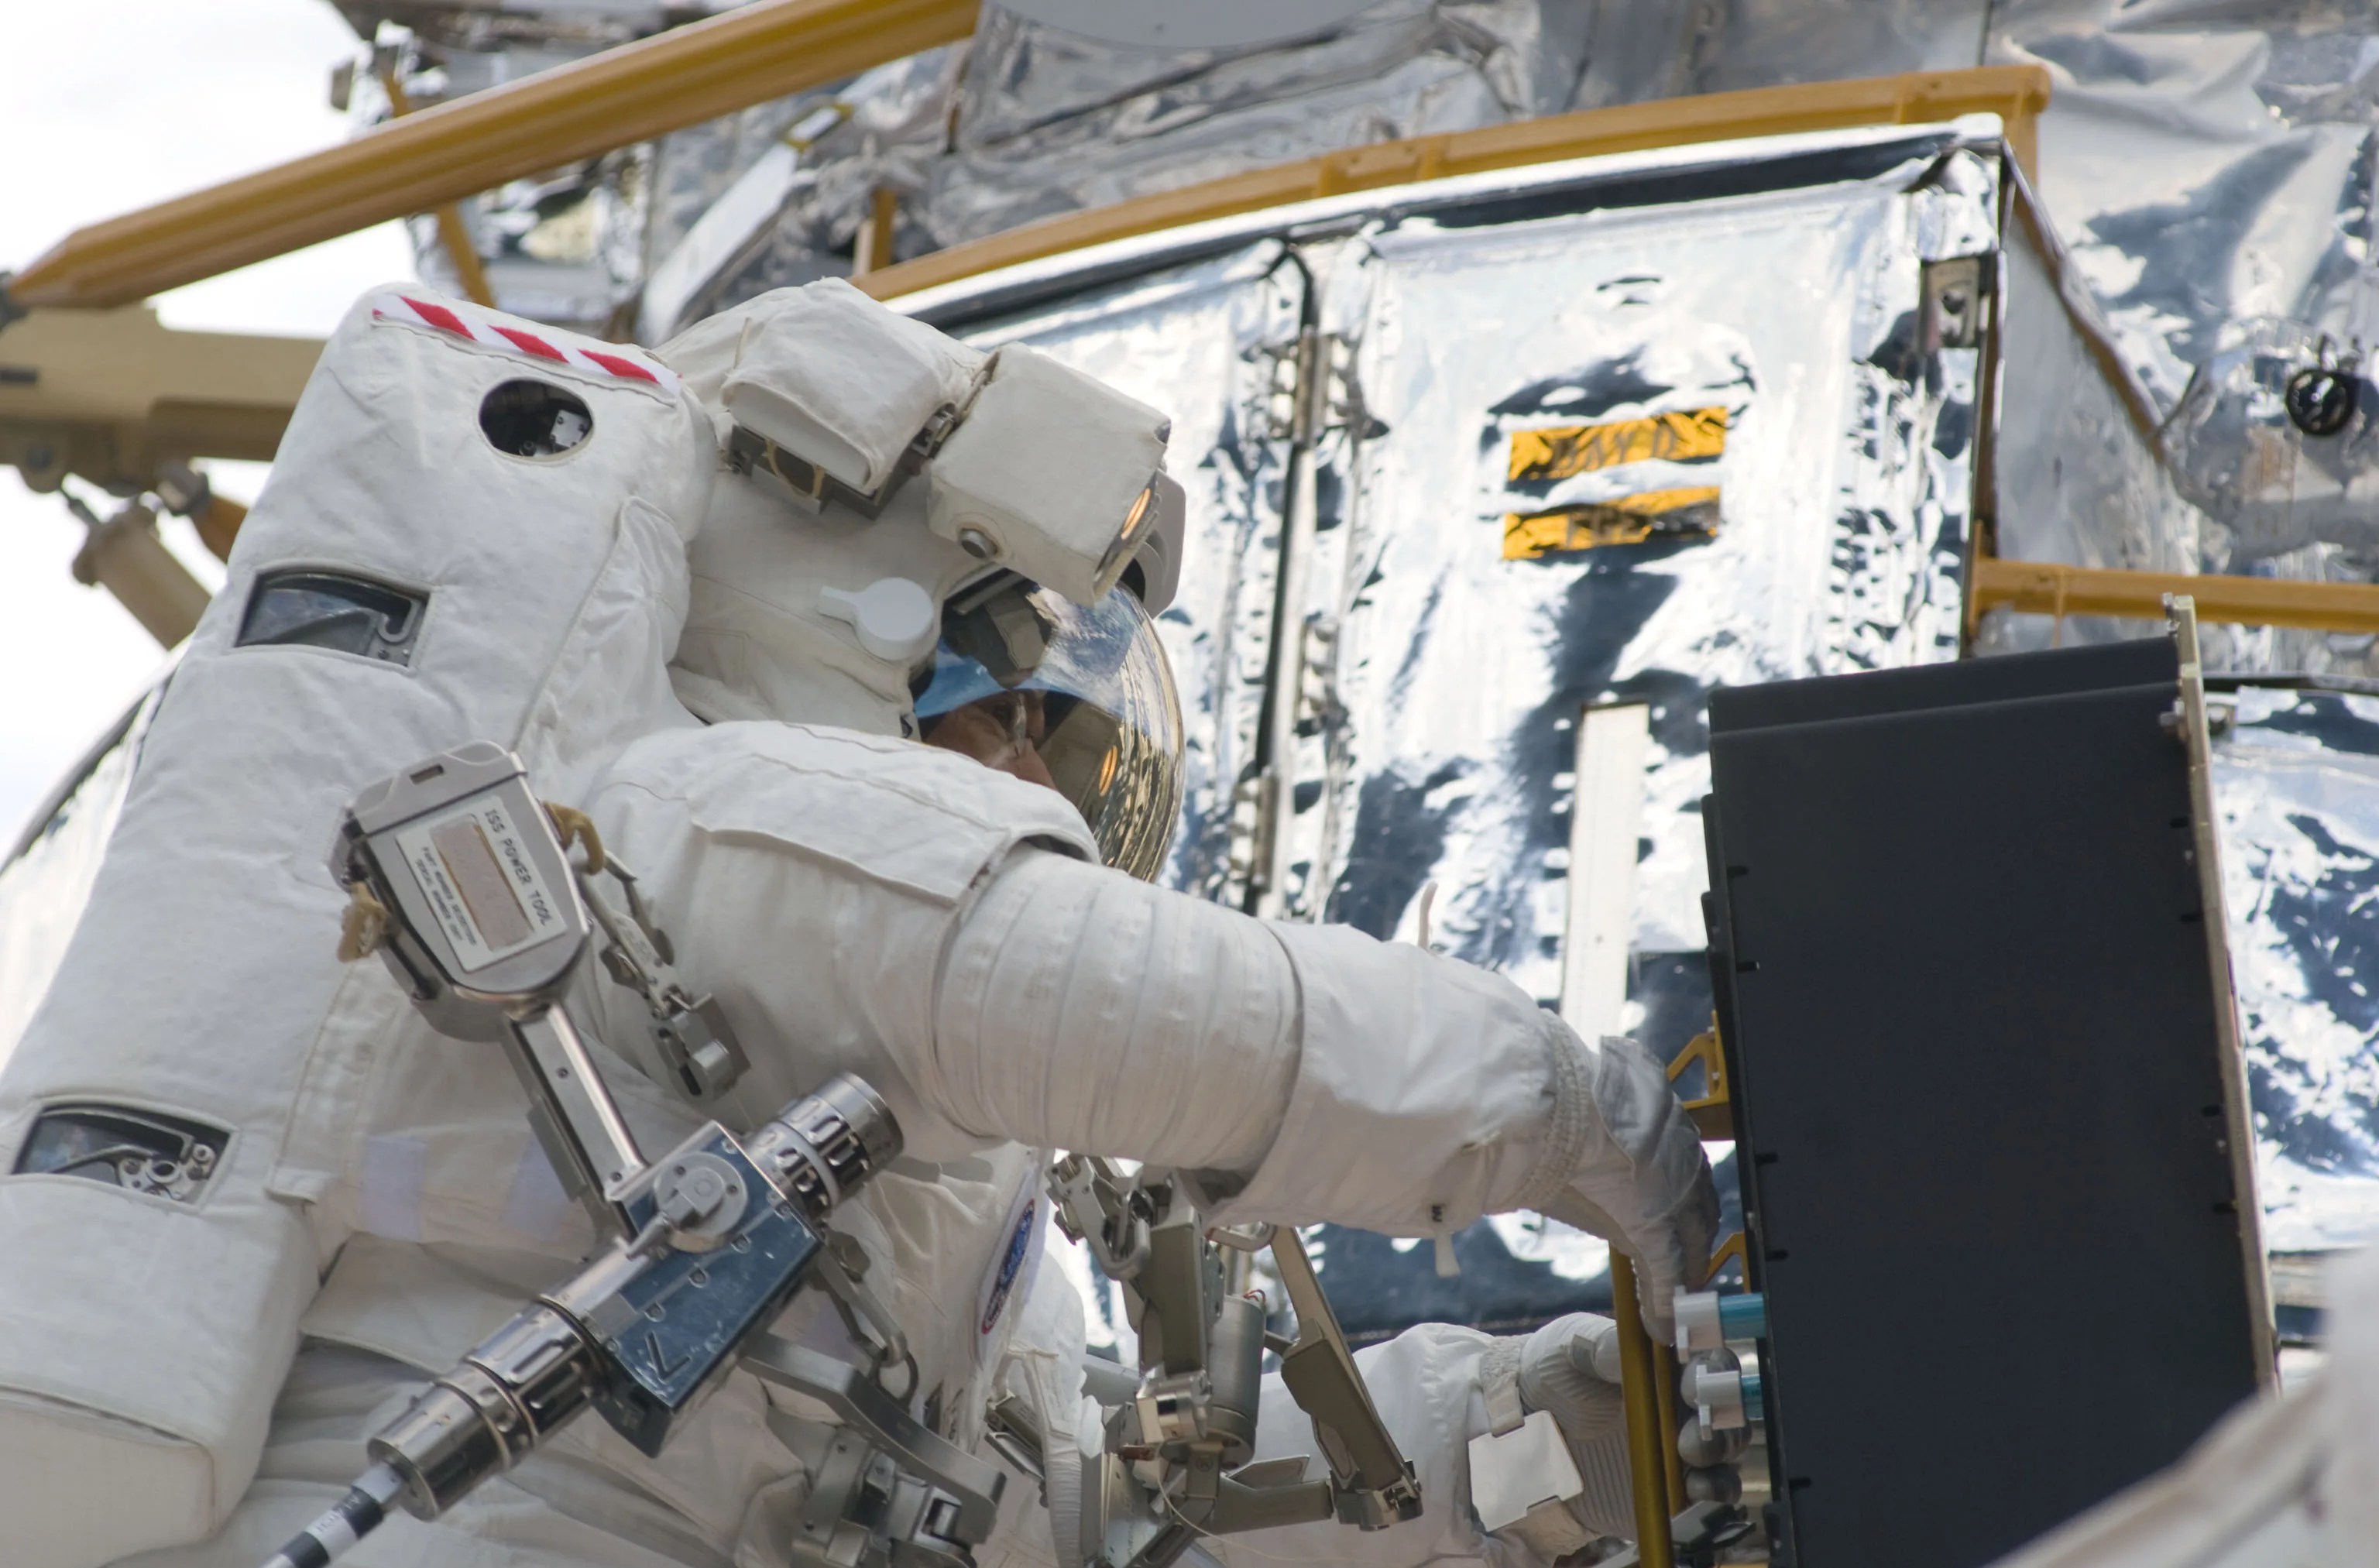 Image shows the side of an astronaut in his space suit in space. He is changing out batteries on the side of the Hubble Space Telescope. The picture is bright, both astronaut and Hubble were in the sun when this was taken. The astronaut's pistol grip tool, which looks like an electric screwdriver, rests at his side.